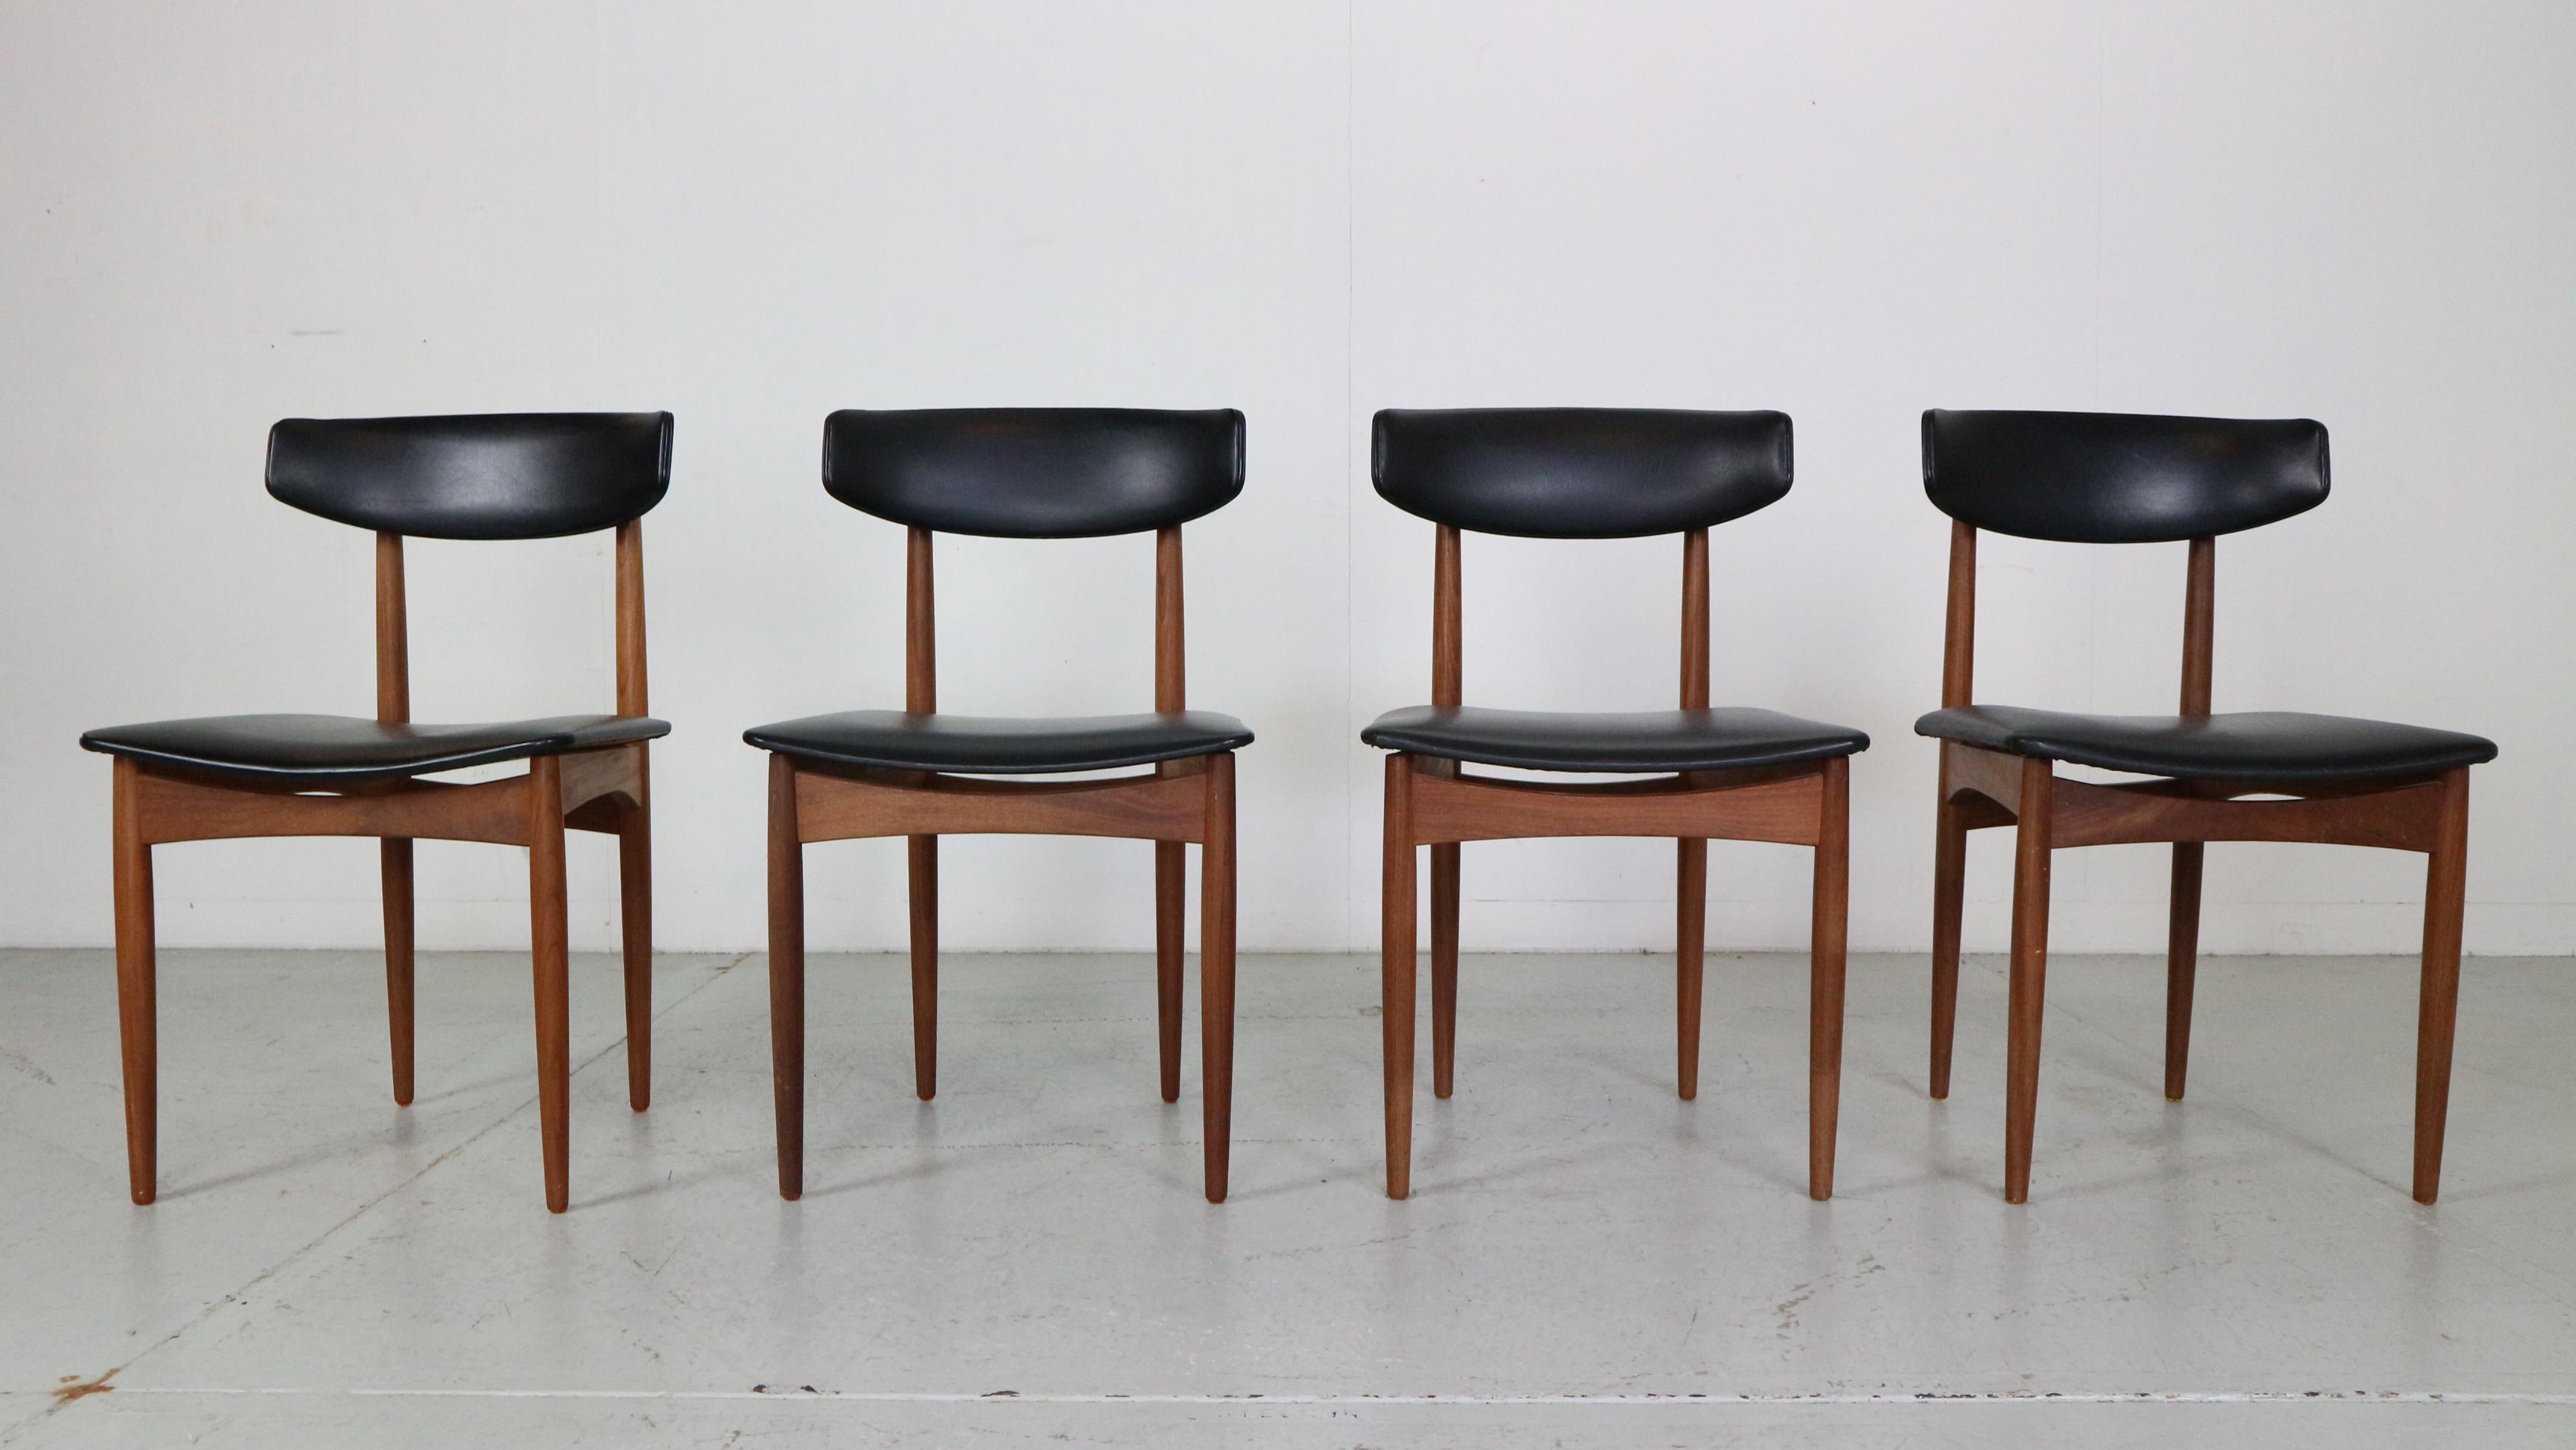 Scandinavian modern period set of 4 dining room chairs made in 1960s, Denmark. 
This set is in a great original condition.
Frame is made of curved solid teak wood. 
And very comfortable seating and back rests are upholstered in black faux leather.

